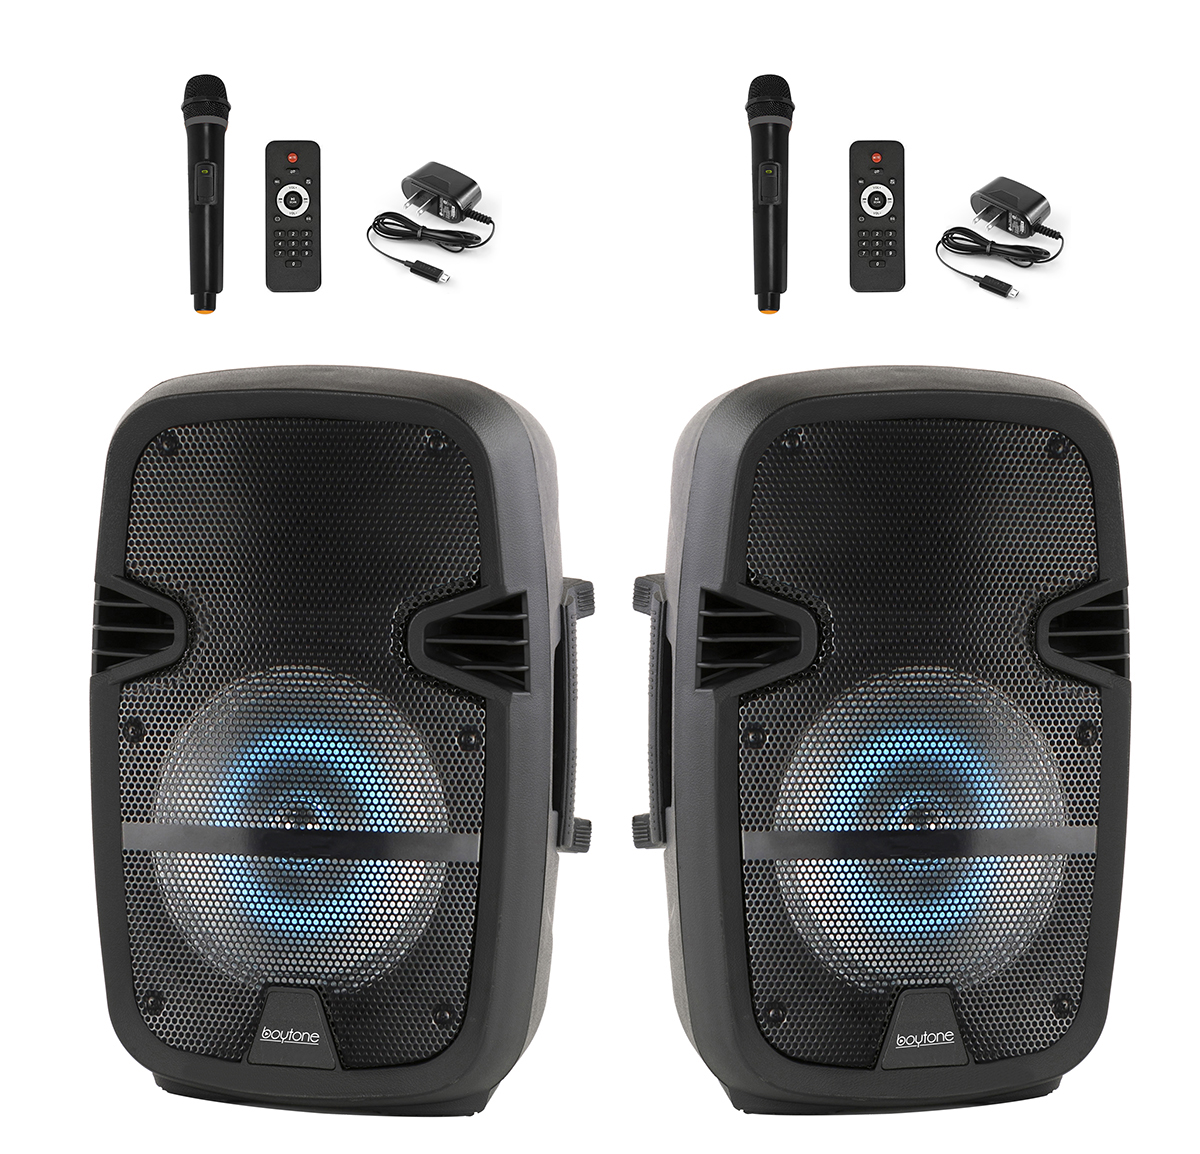 Pair of BT-08SP2 Boytone 8” Portable Bluetooth PA Speaker, Rechargeable, Karaoke, Wireless Microphone, TWS(Wireless) to Connect both Speakers Together. DJ Lights, FM, MP3, USB Port, TF Slot, AUX - image 3 of 7